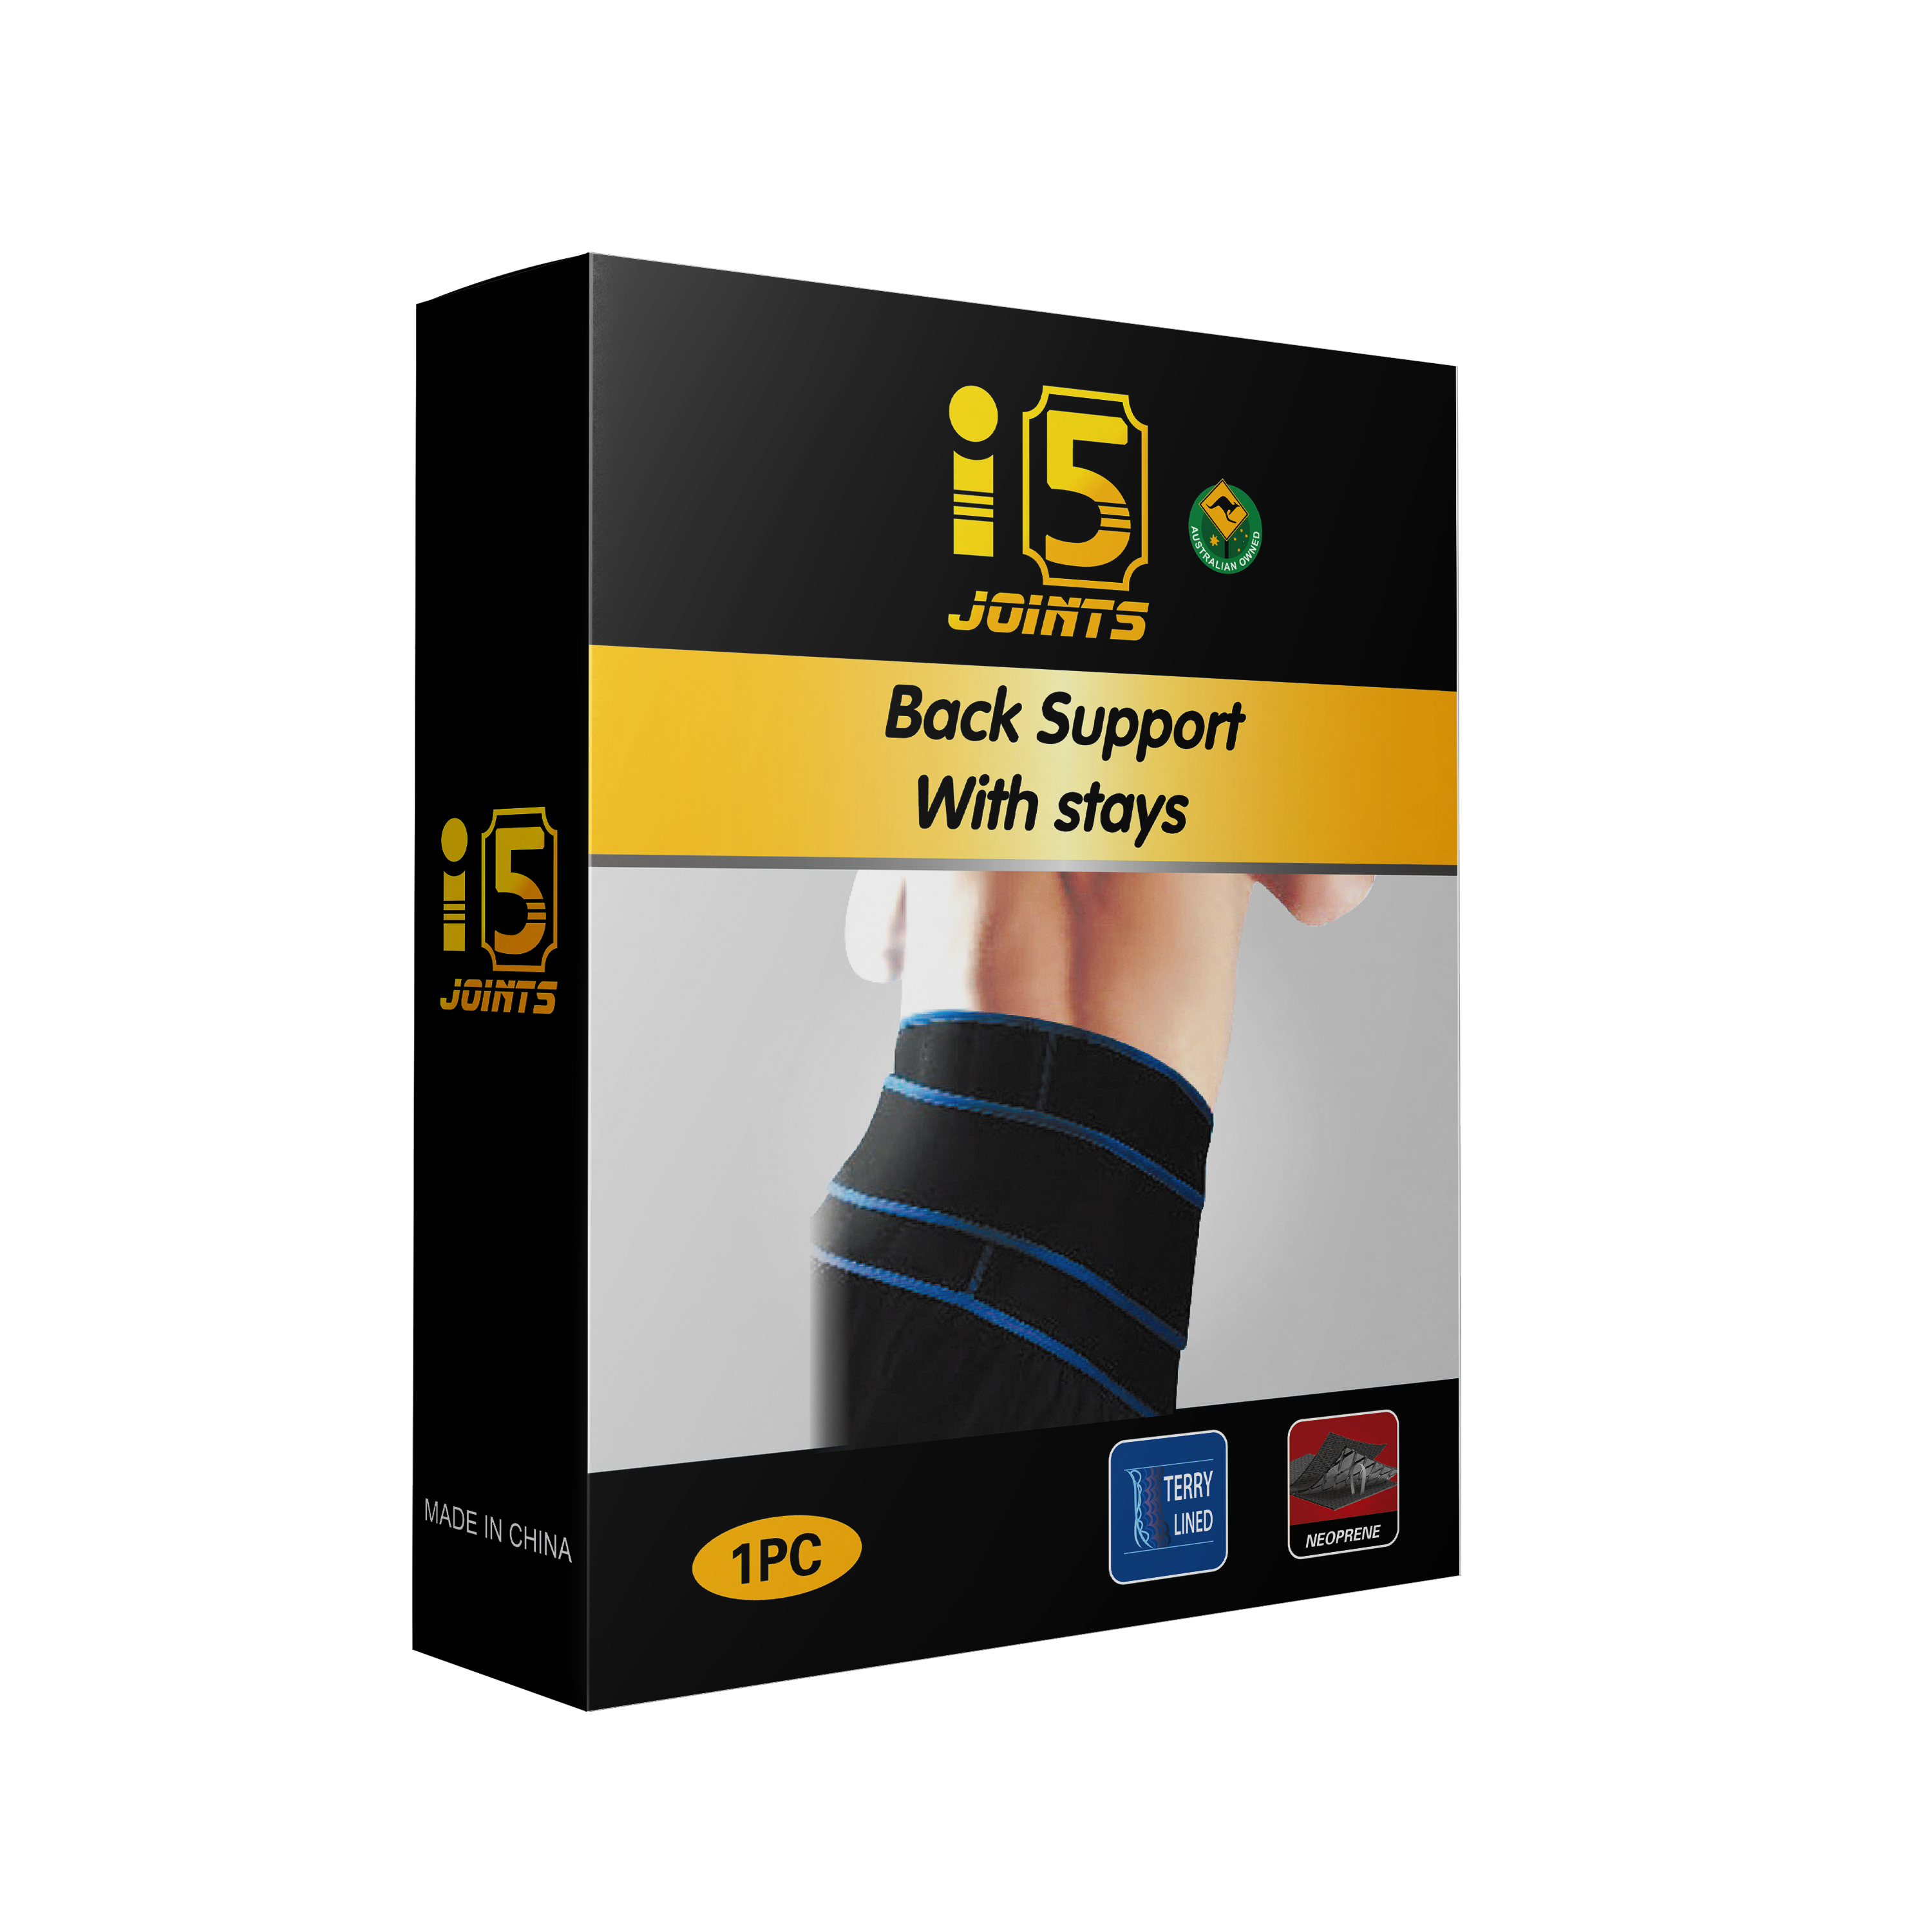 I5Joints – Back Support With Stays(Painfree Support Belt,pain relif brace,reliving back pain instantly)